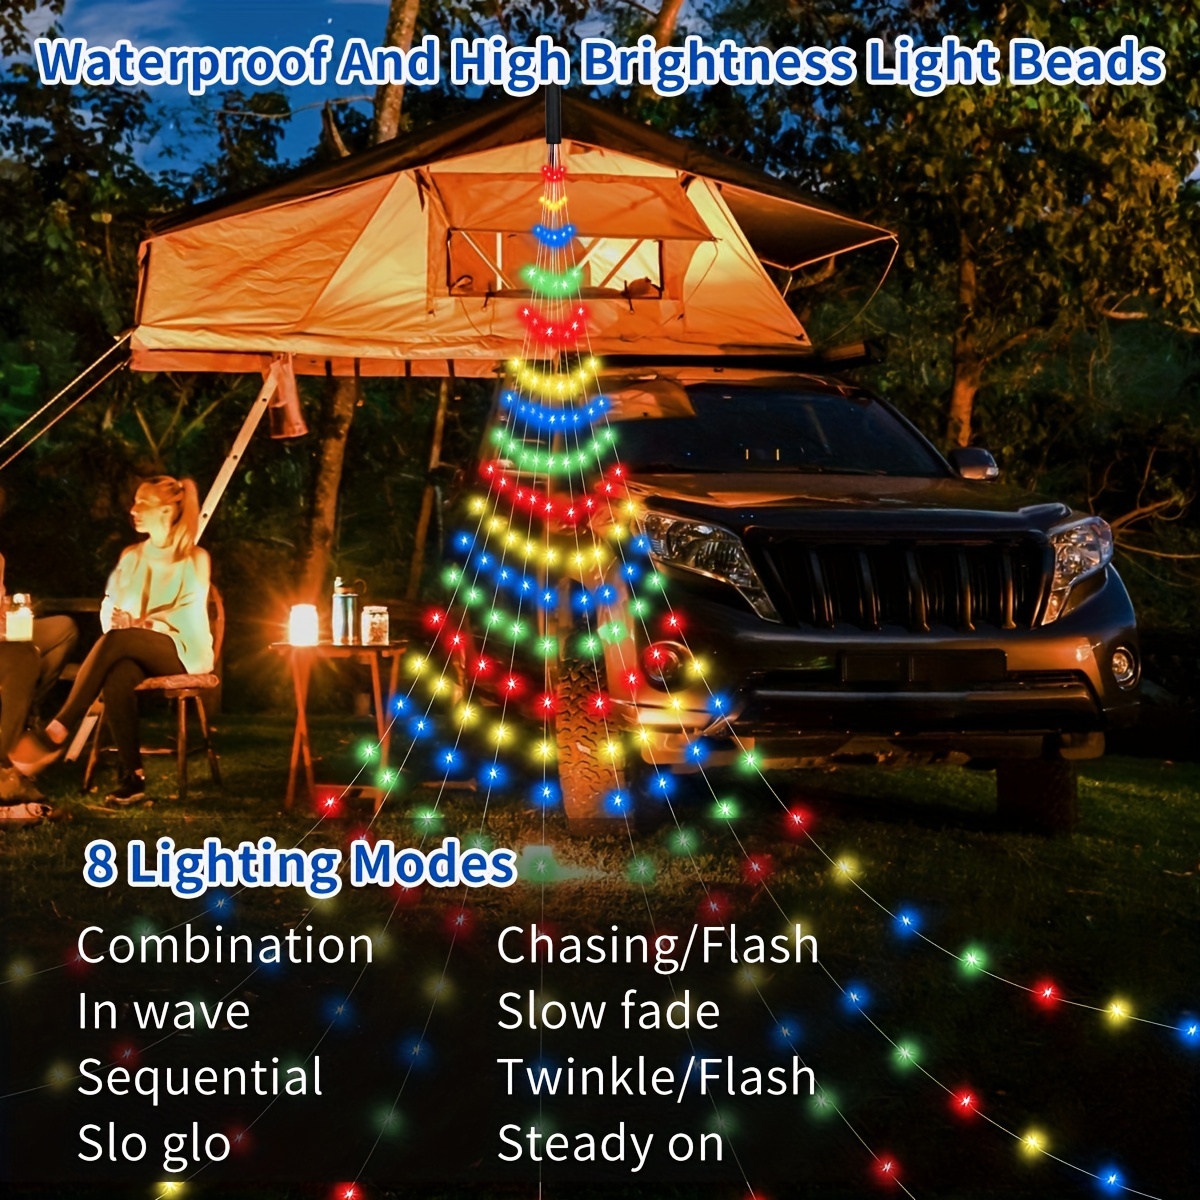 Outdoor Christmas Star String Lights, Smart RGB Waterfall Tree String Light with App Remote Control, DIY Modes Dimmable Timer Music Sync Shooting Star